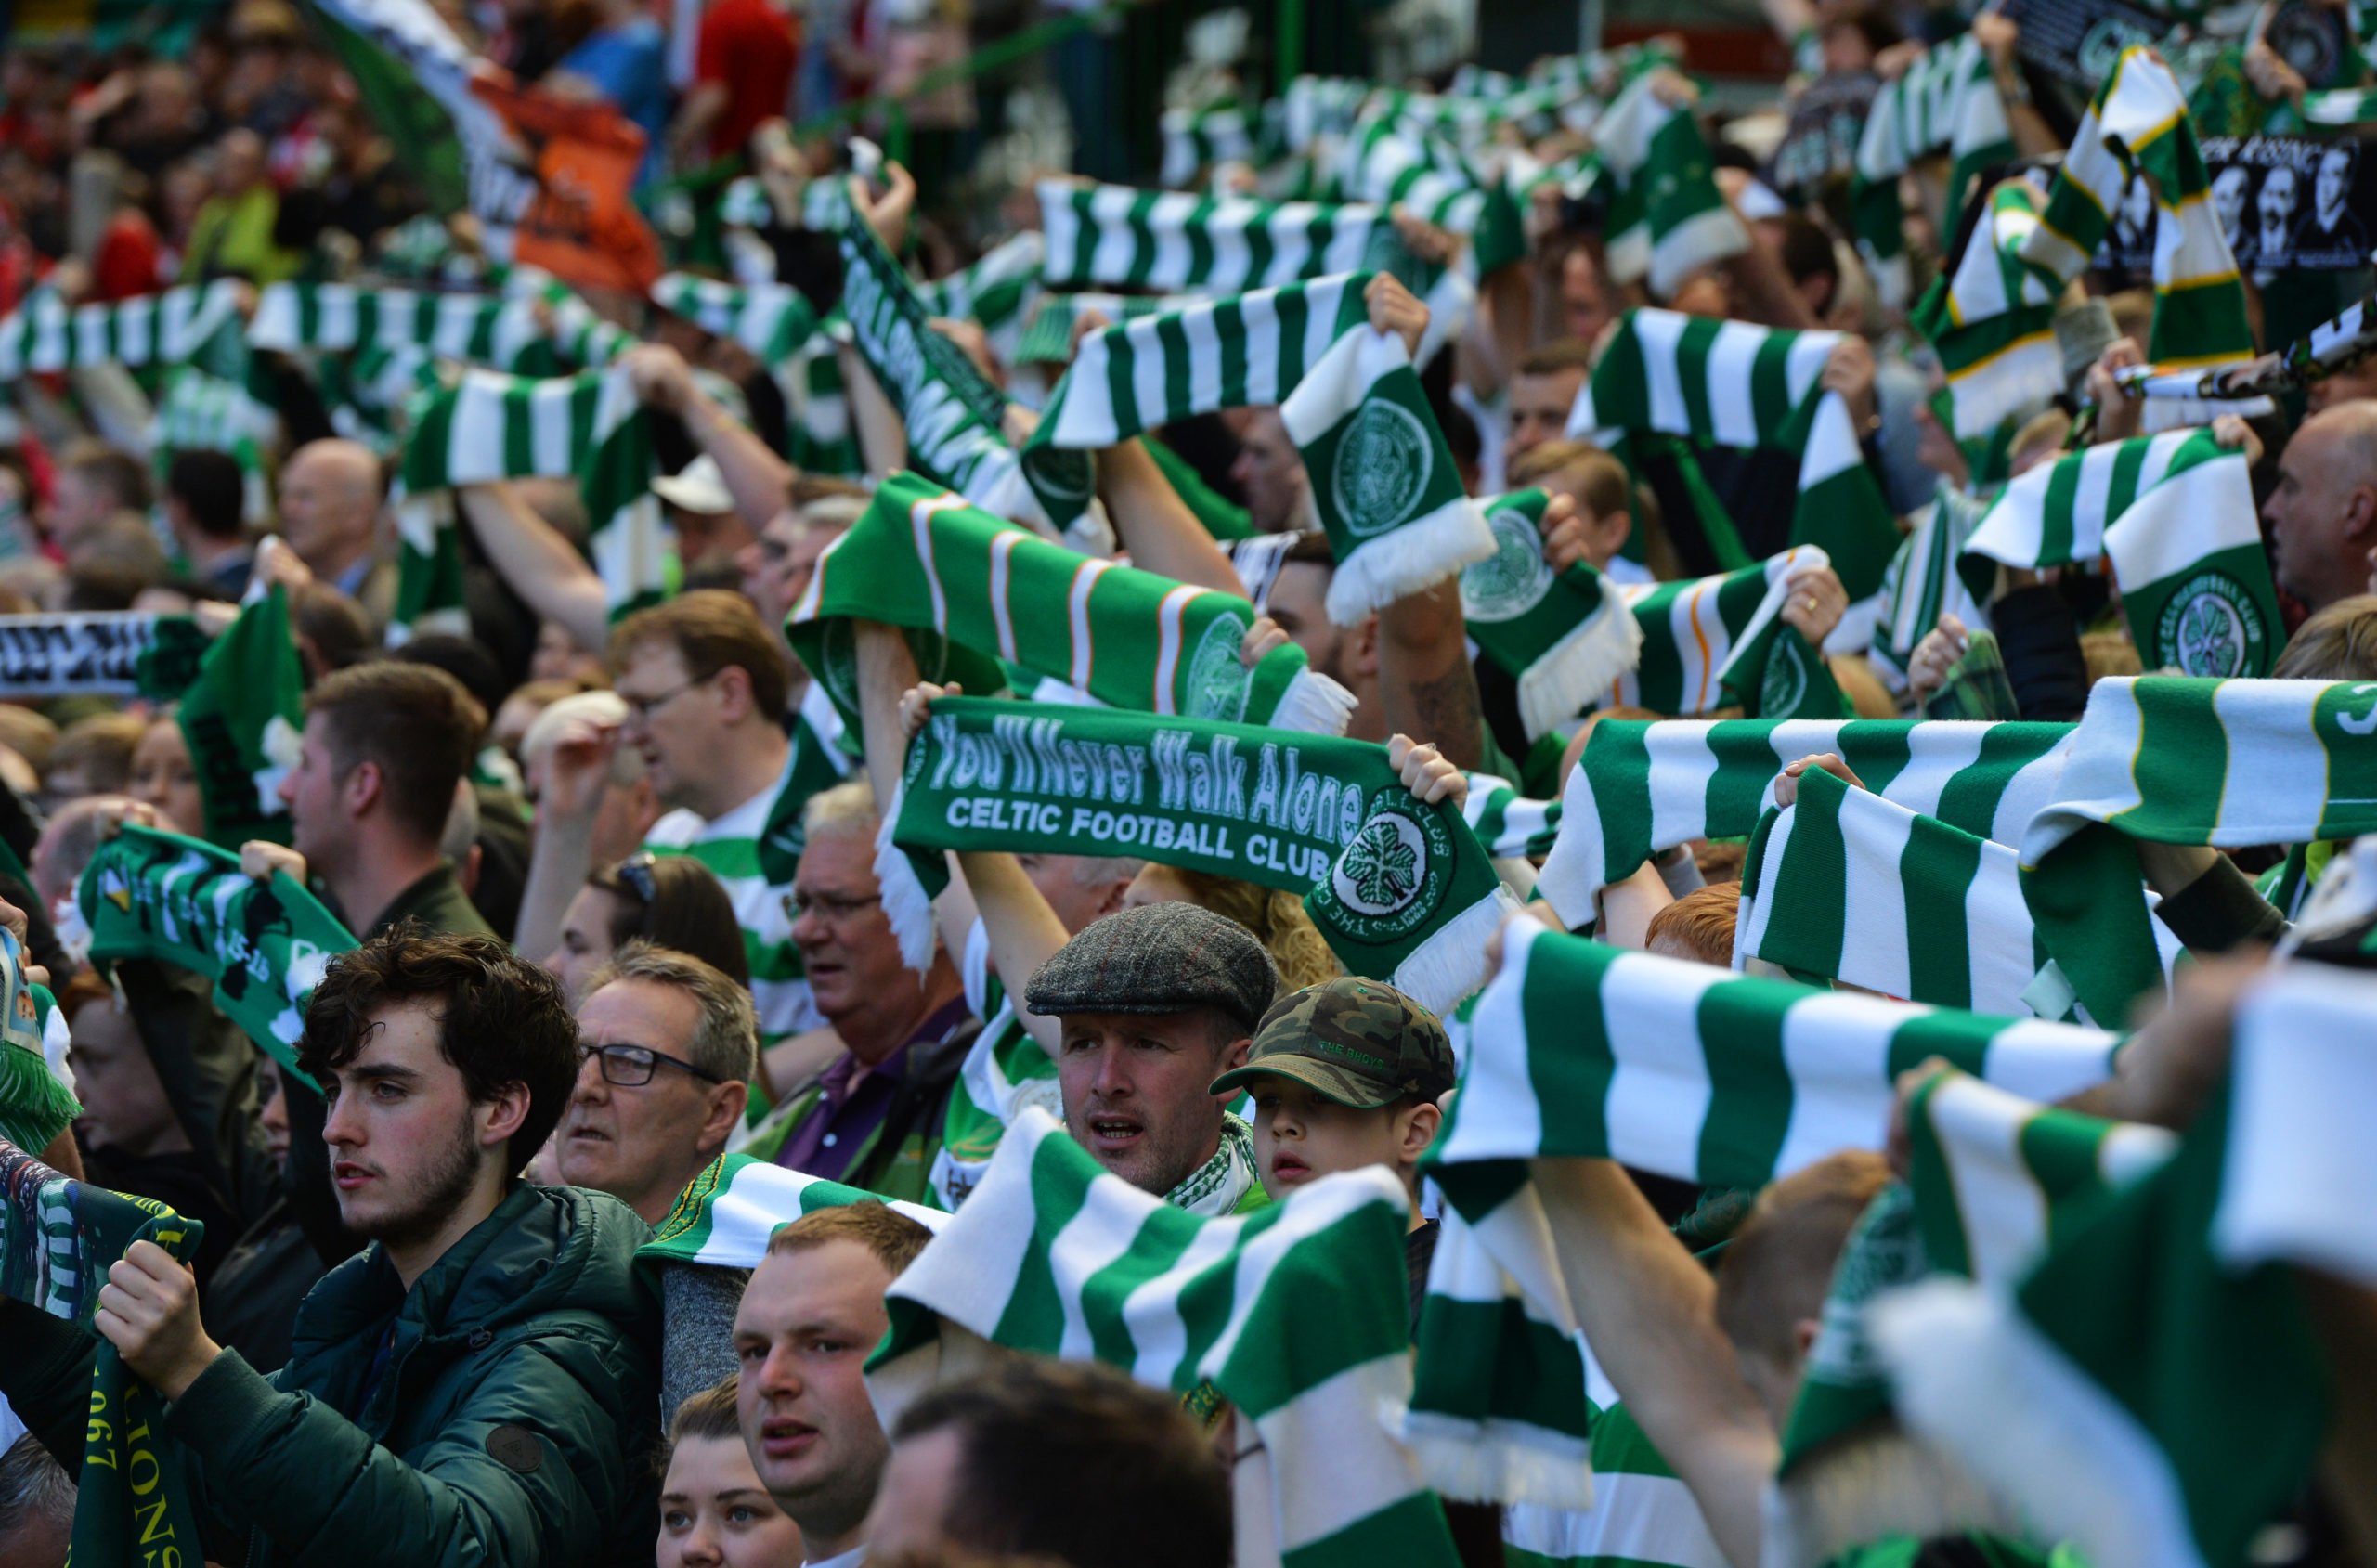 Supporters group Celtic Shared condemn season ticket offering